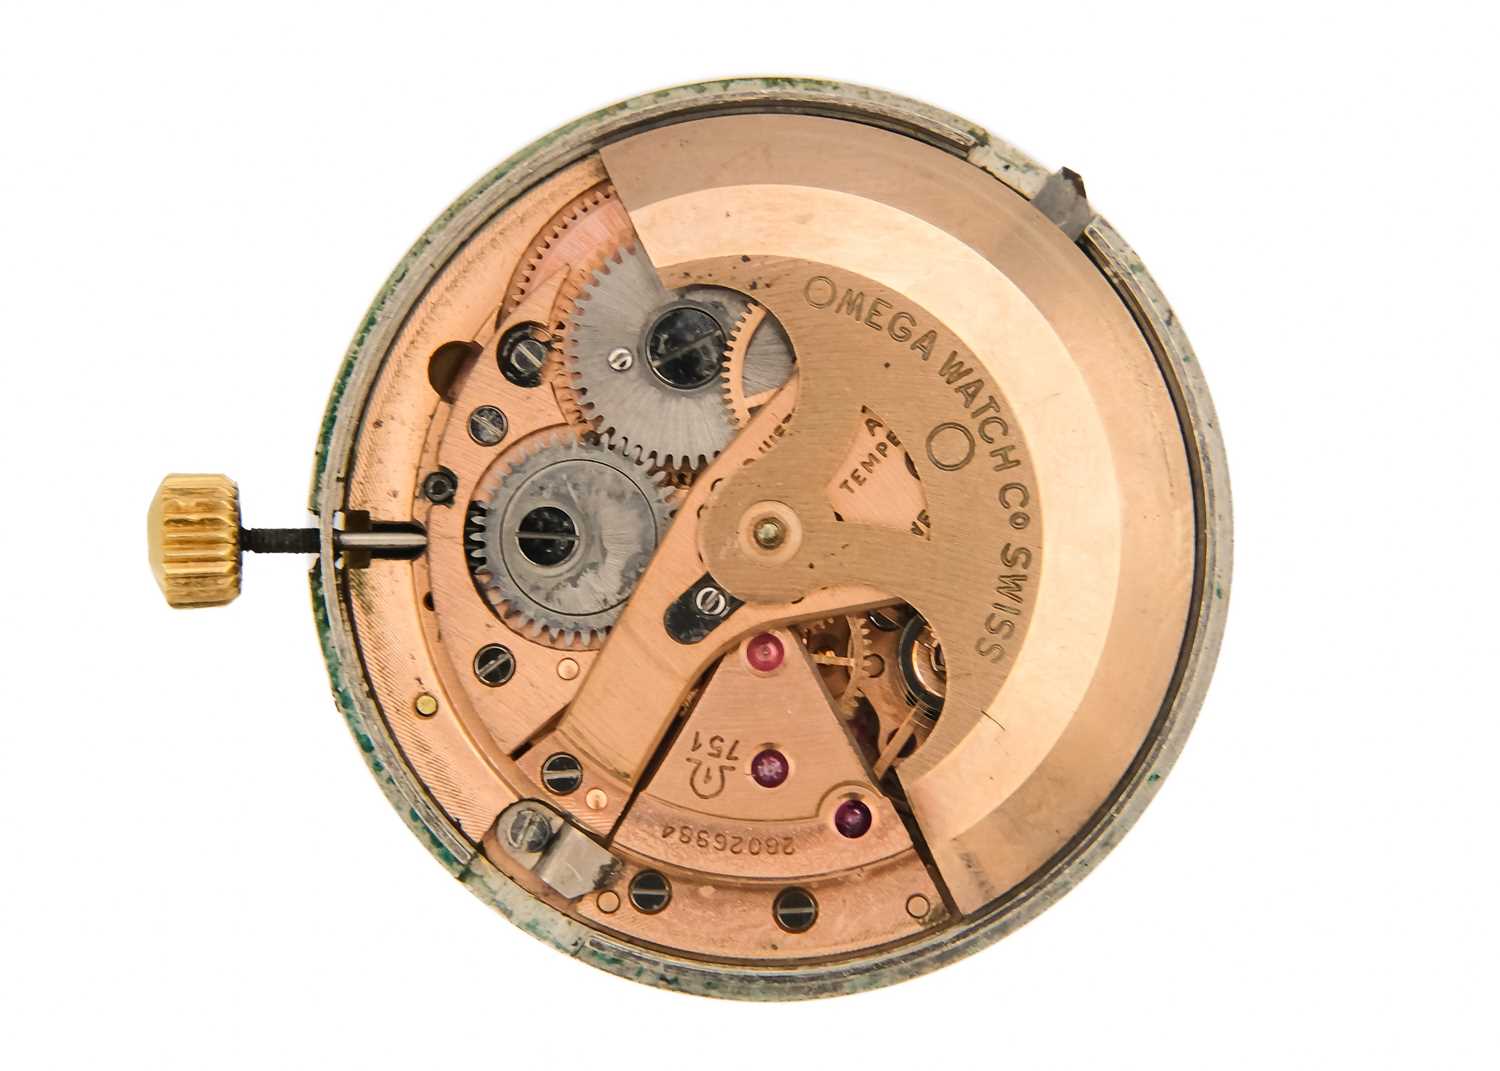 OMEGA - A Constellation Automatic chronometer dial and movement, cal. 751. - Image 3 of 3